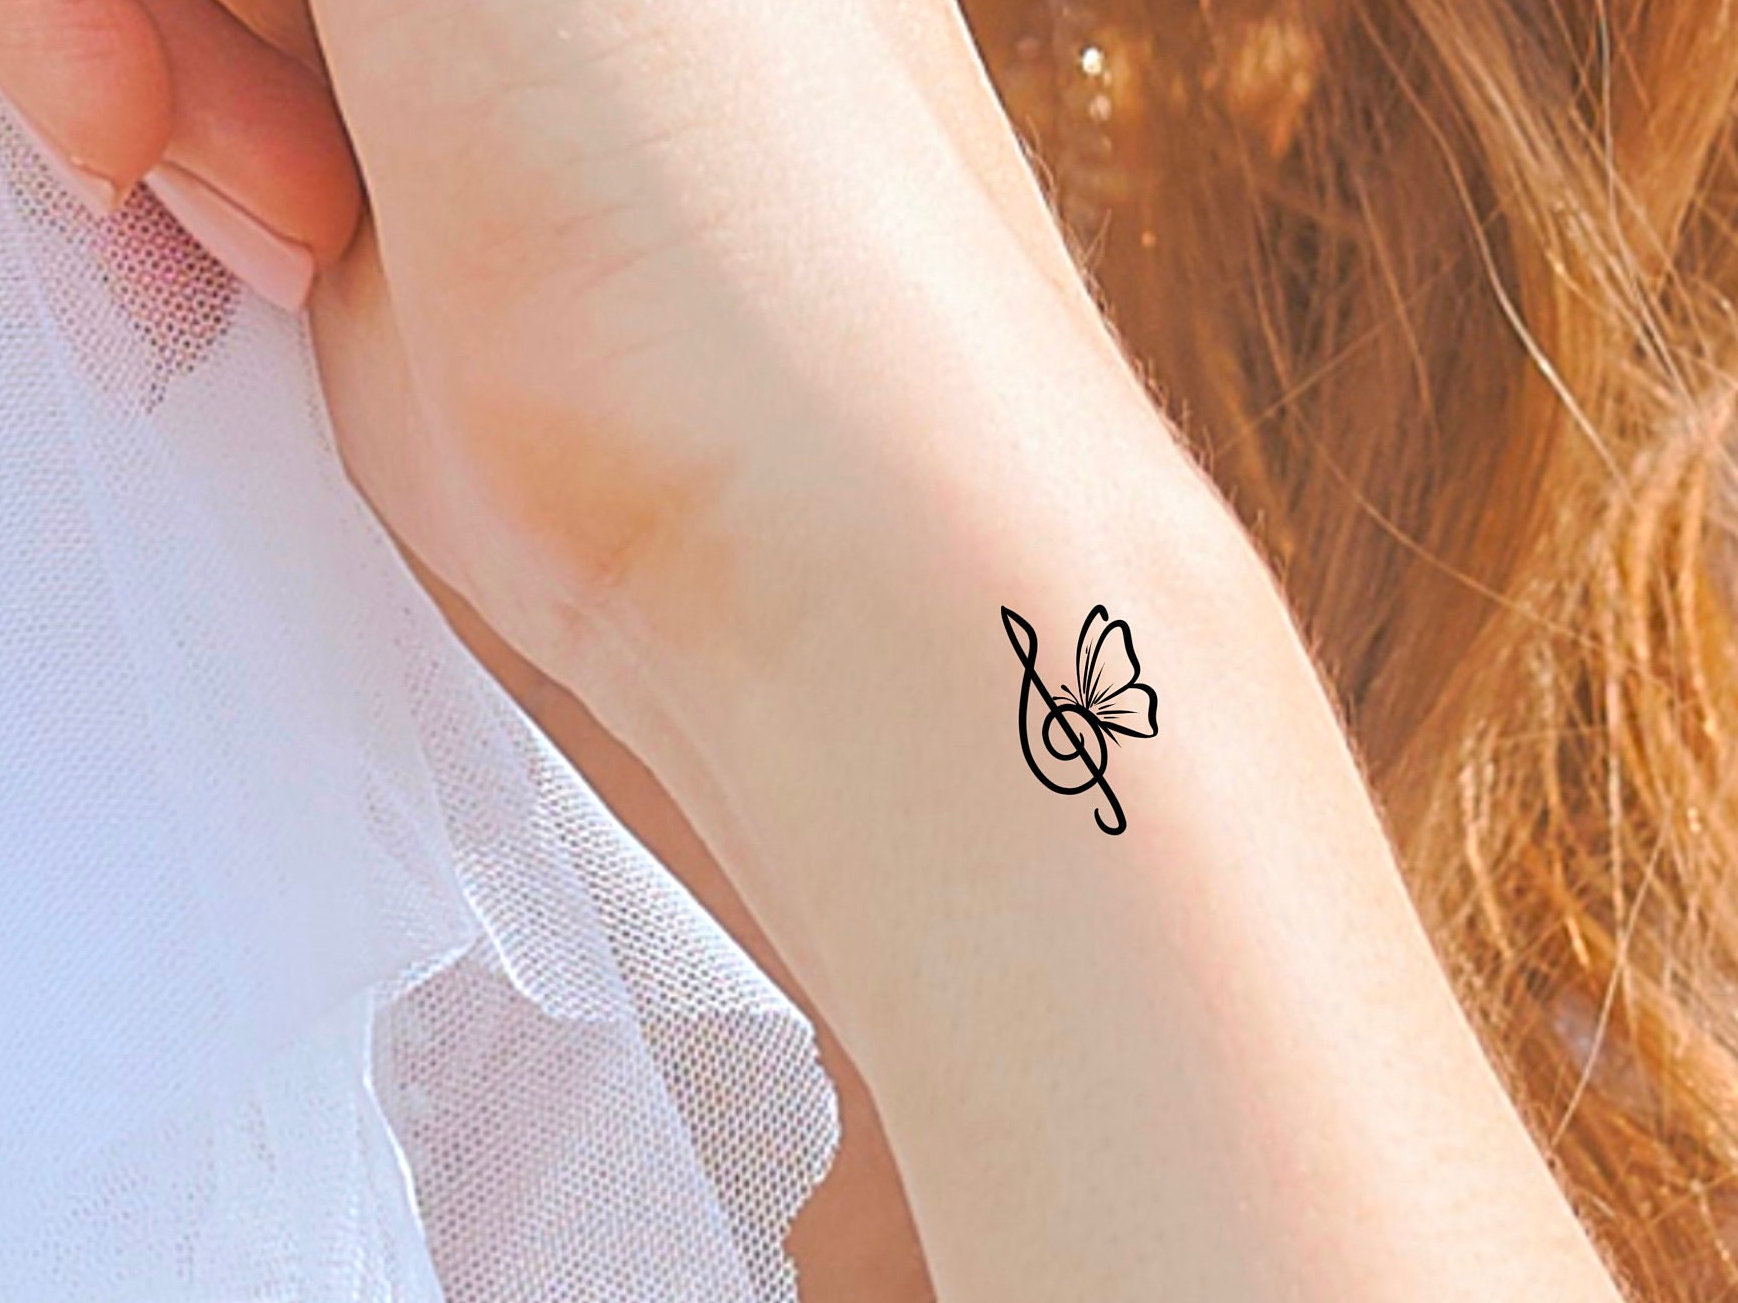 Butterfly with Music Note tattoo design on wrist tattoo d  Flickr